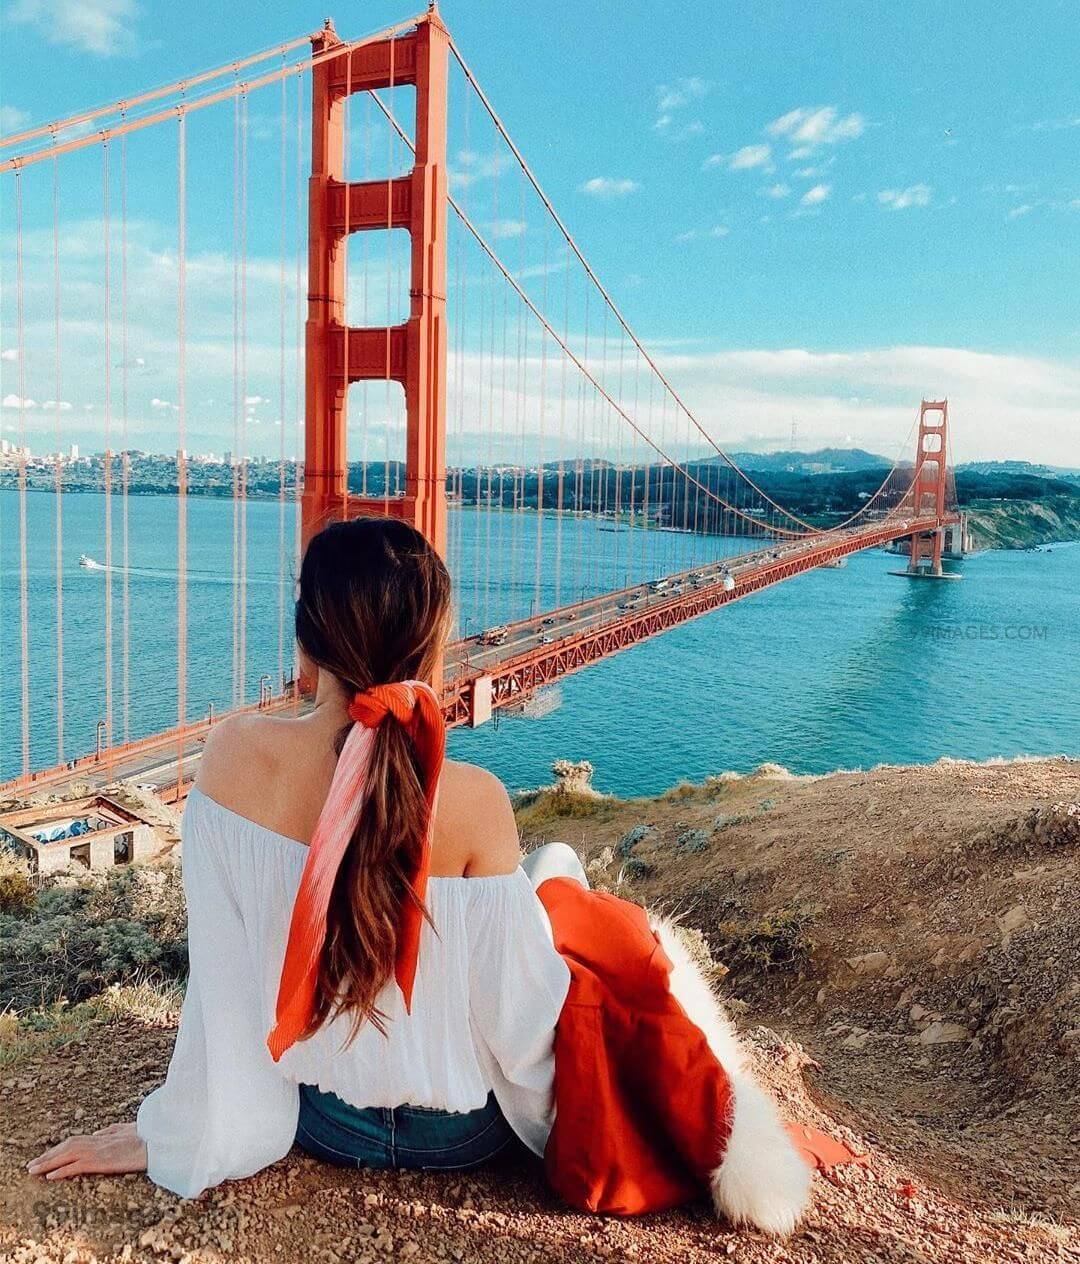 Best places to see the Golden Gate Bridge, San Francisco